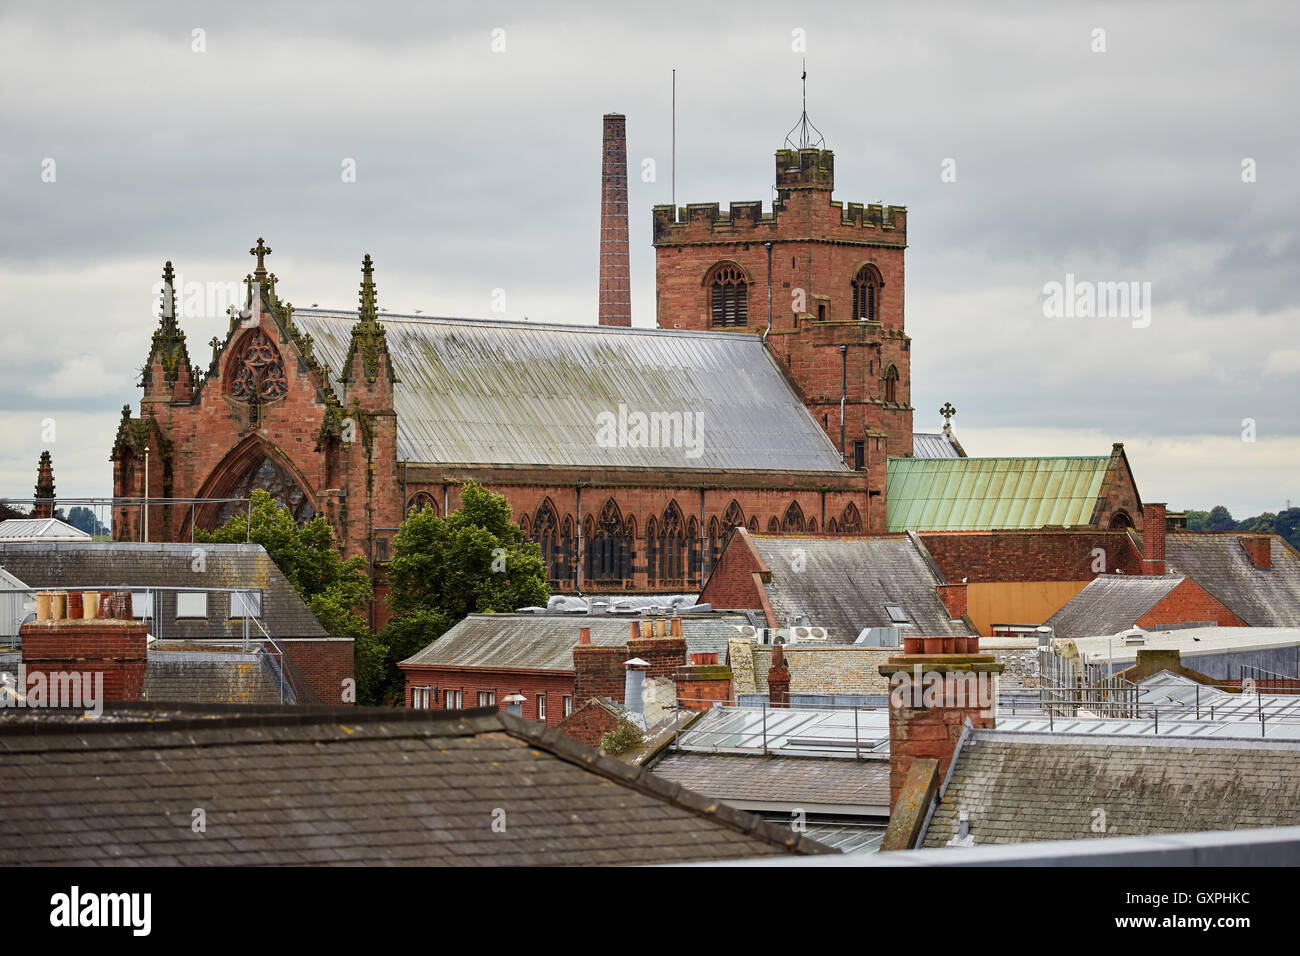 Carlisle historic market indoor hall   Cumbria early Cathedral Church of the Holy and Undivided Trinity over rooftops historic a Stock Photo